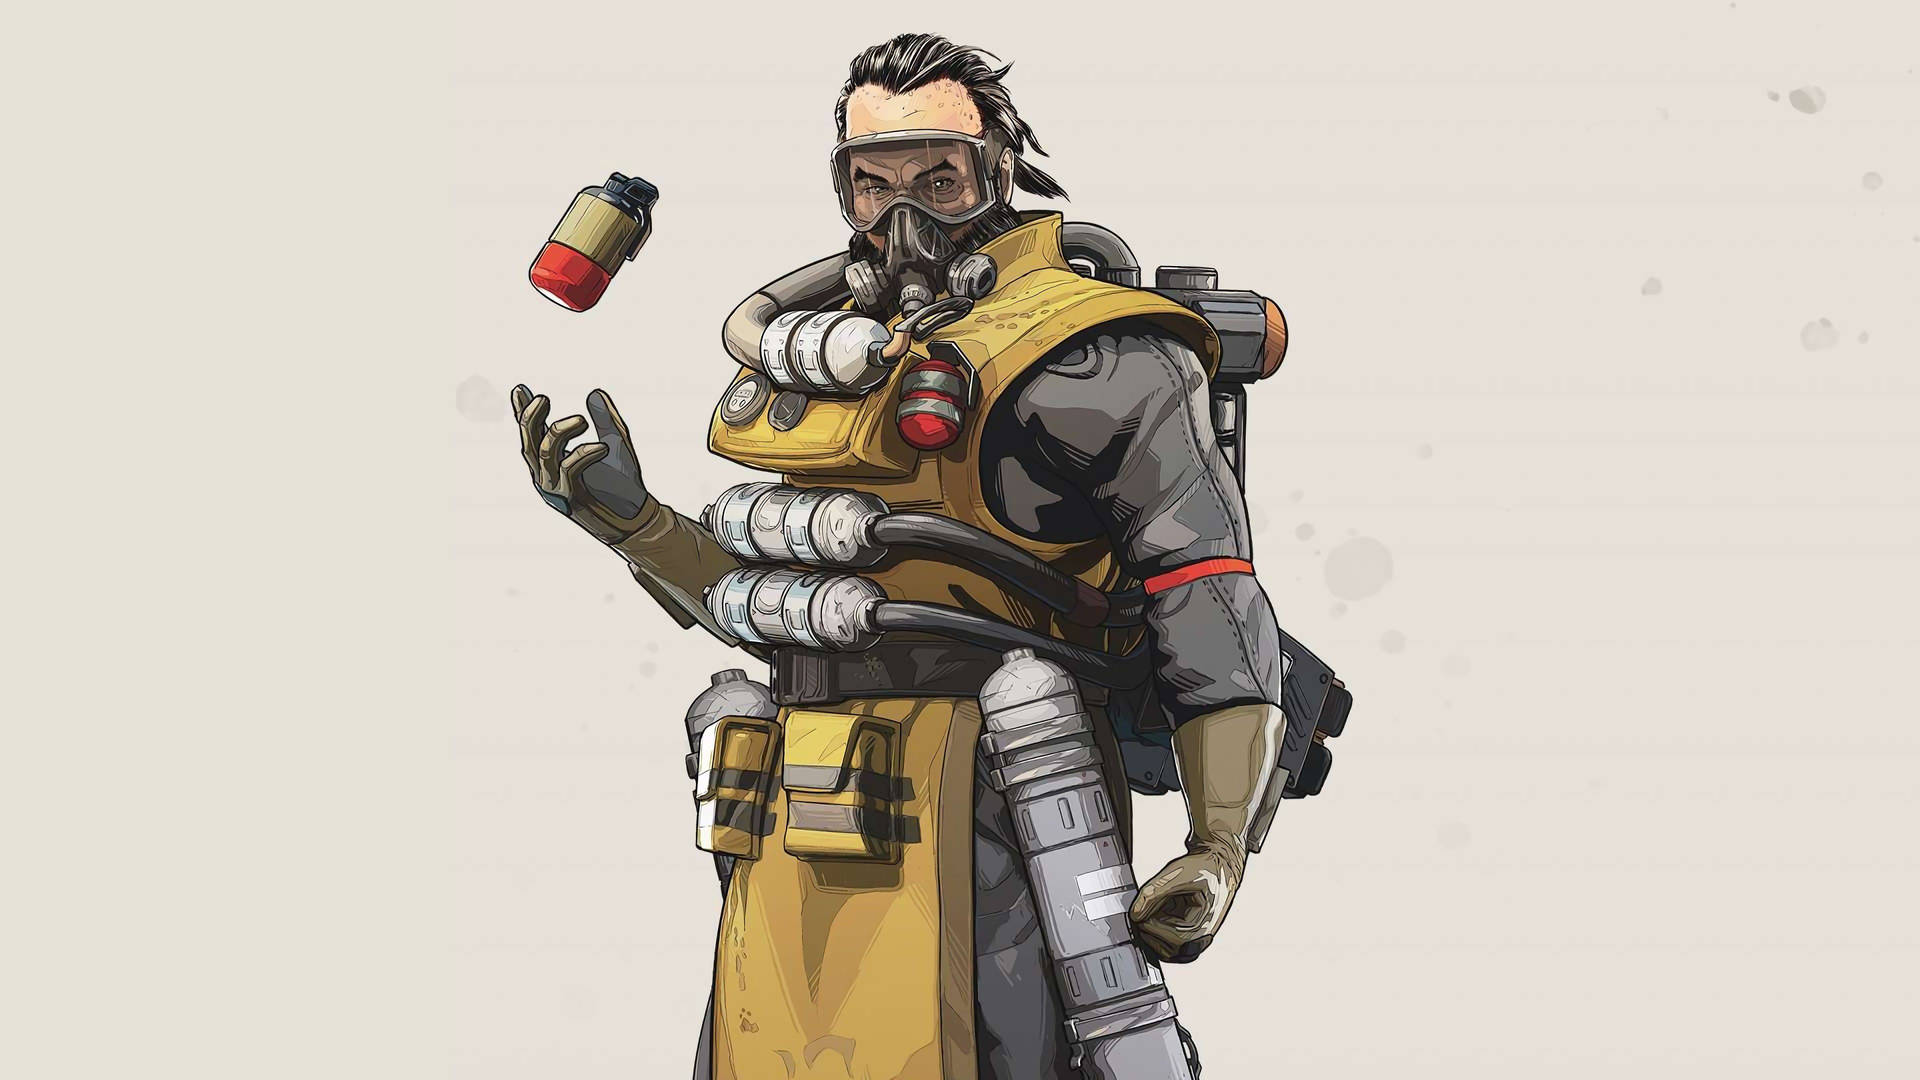 3840X2160 Apex Legends Wallpaper and Background